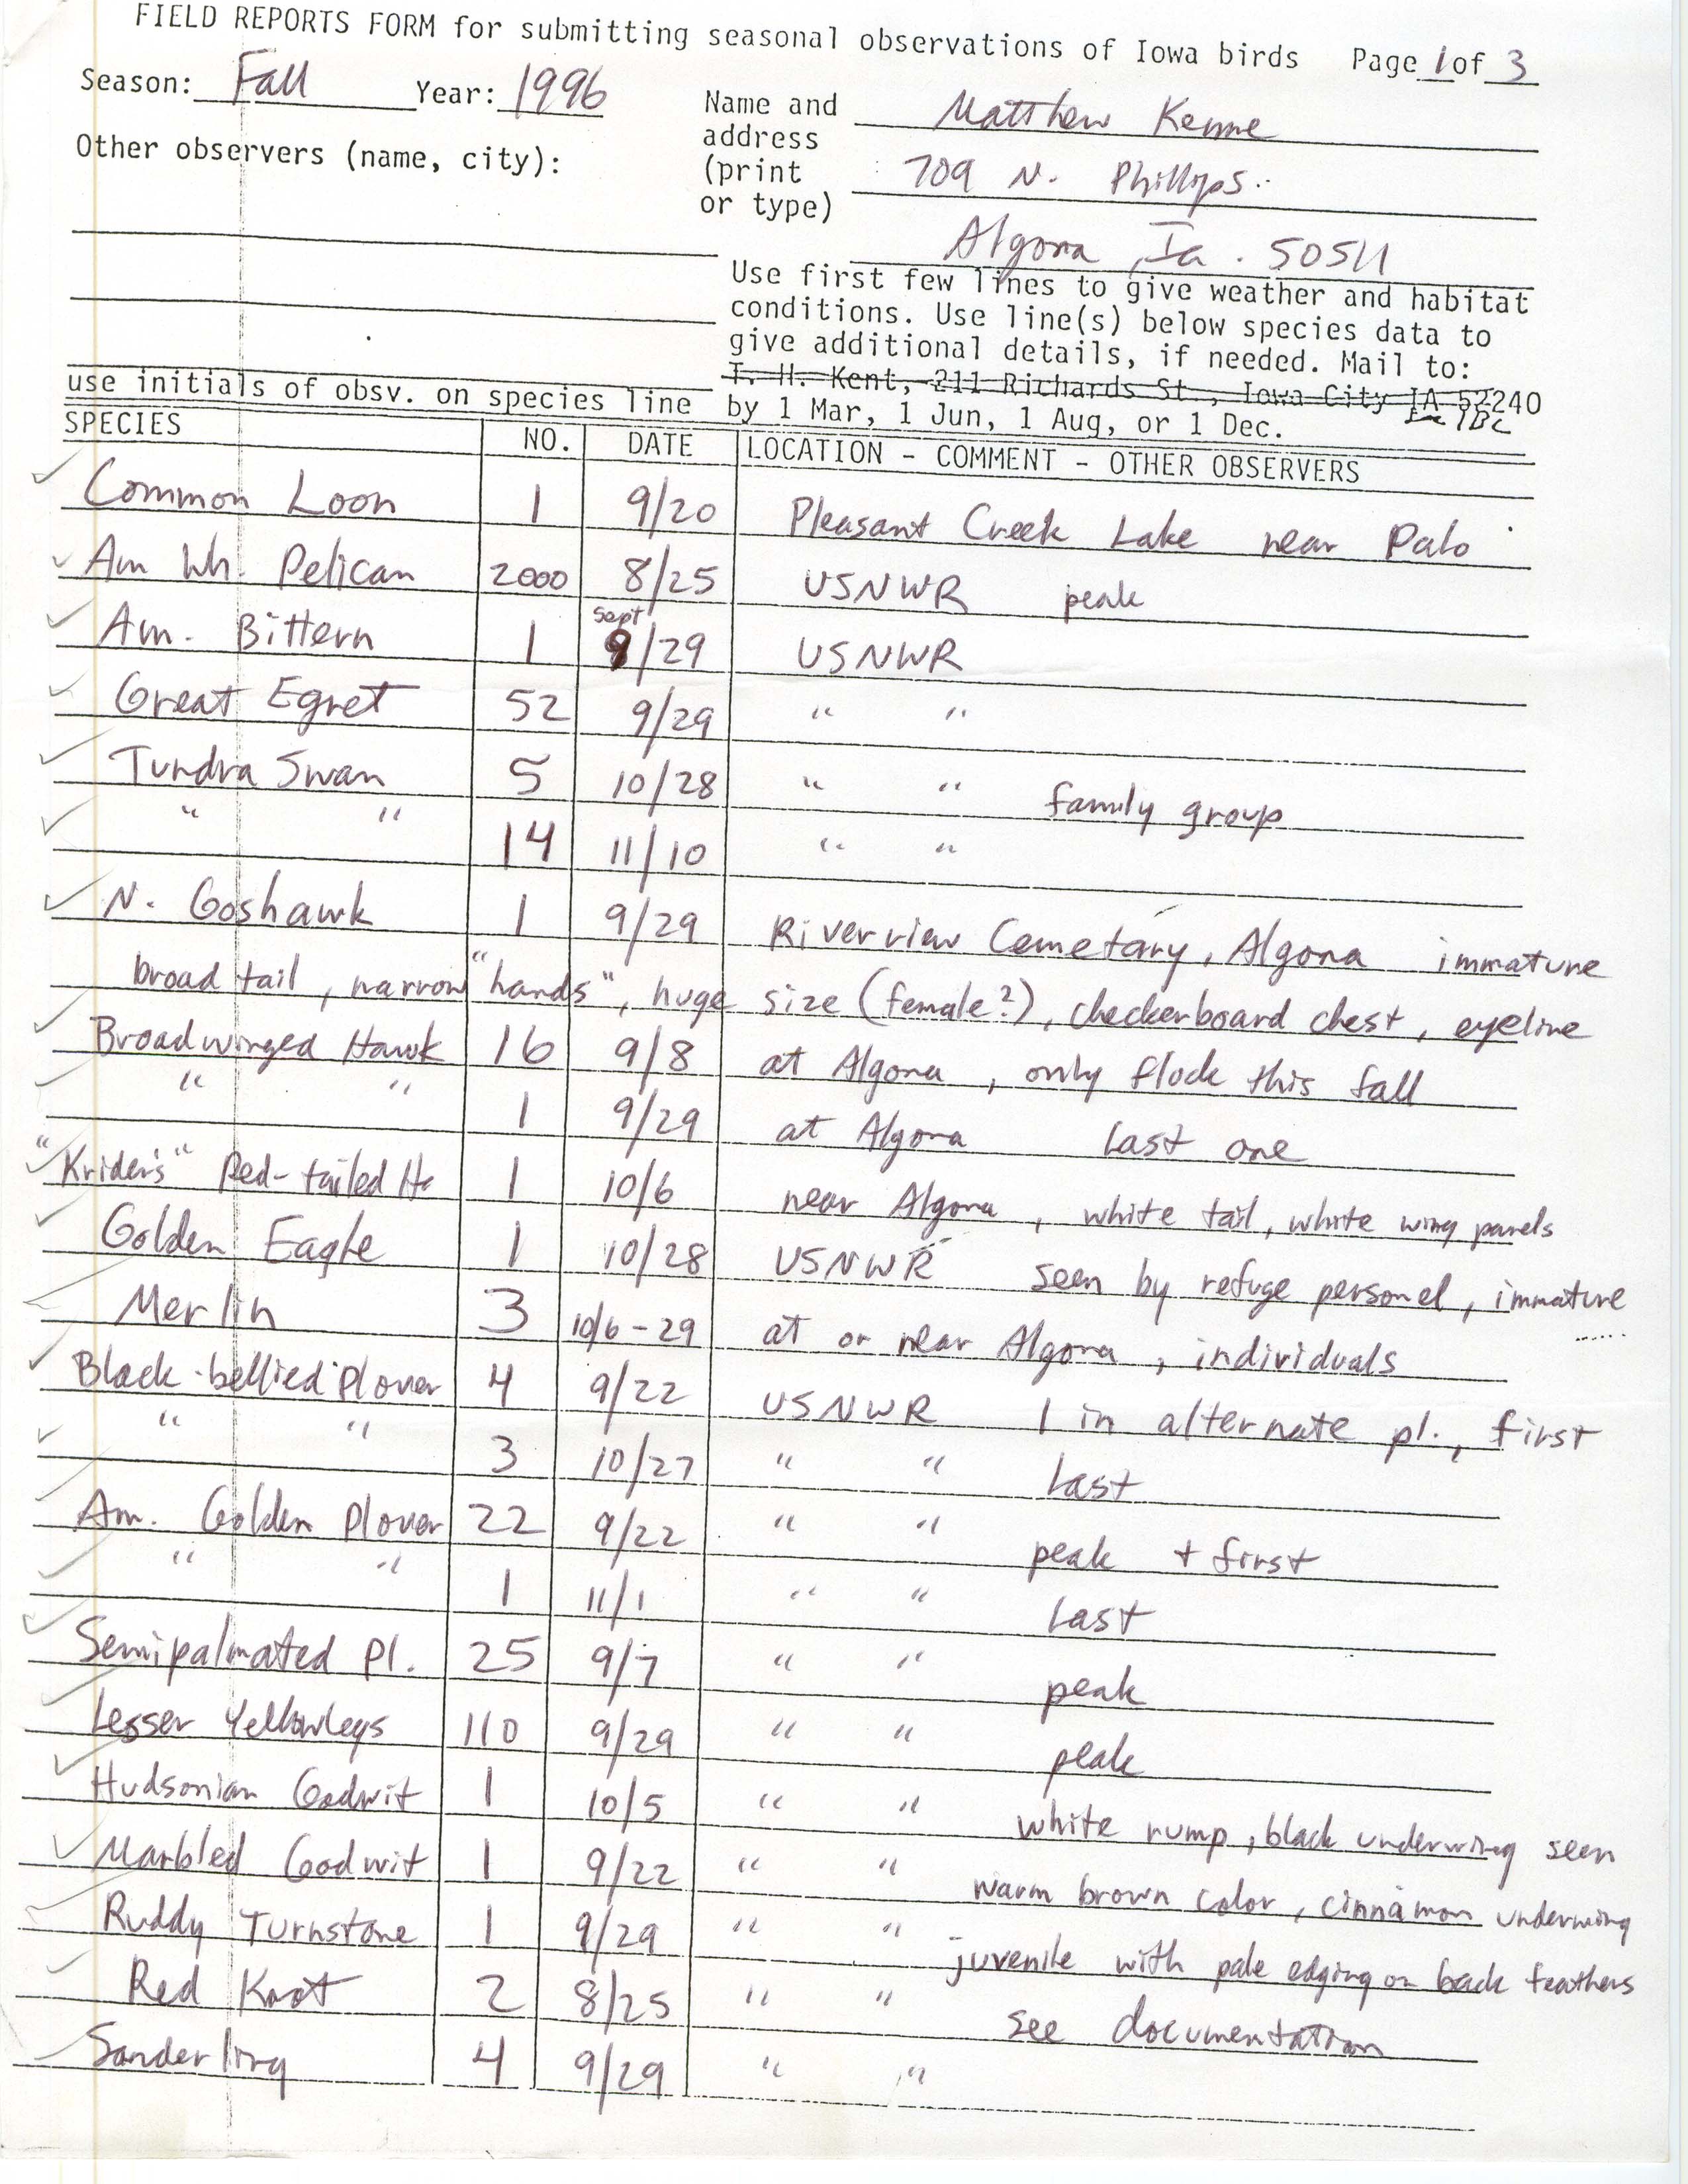 Field reports form for submitting seasonal observations of Iowa birds, Matthew Kenne, fall 1996